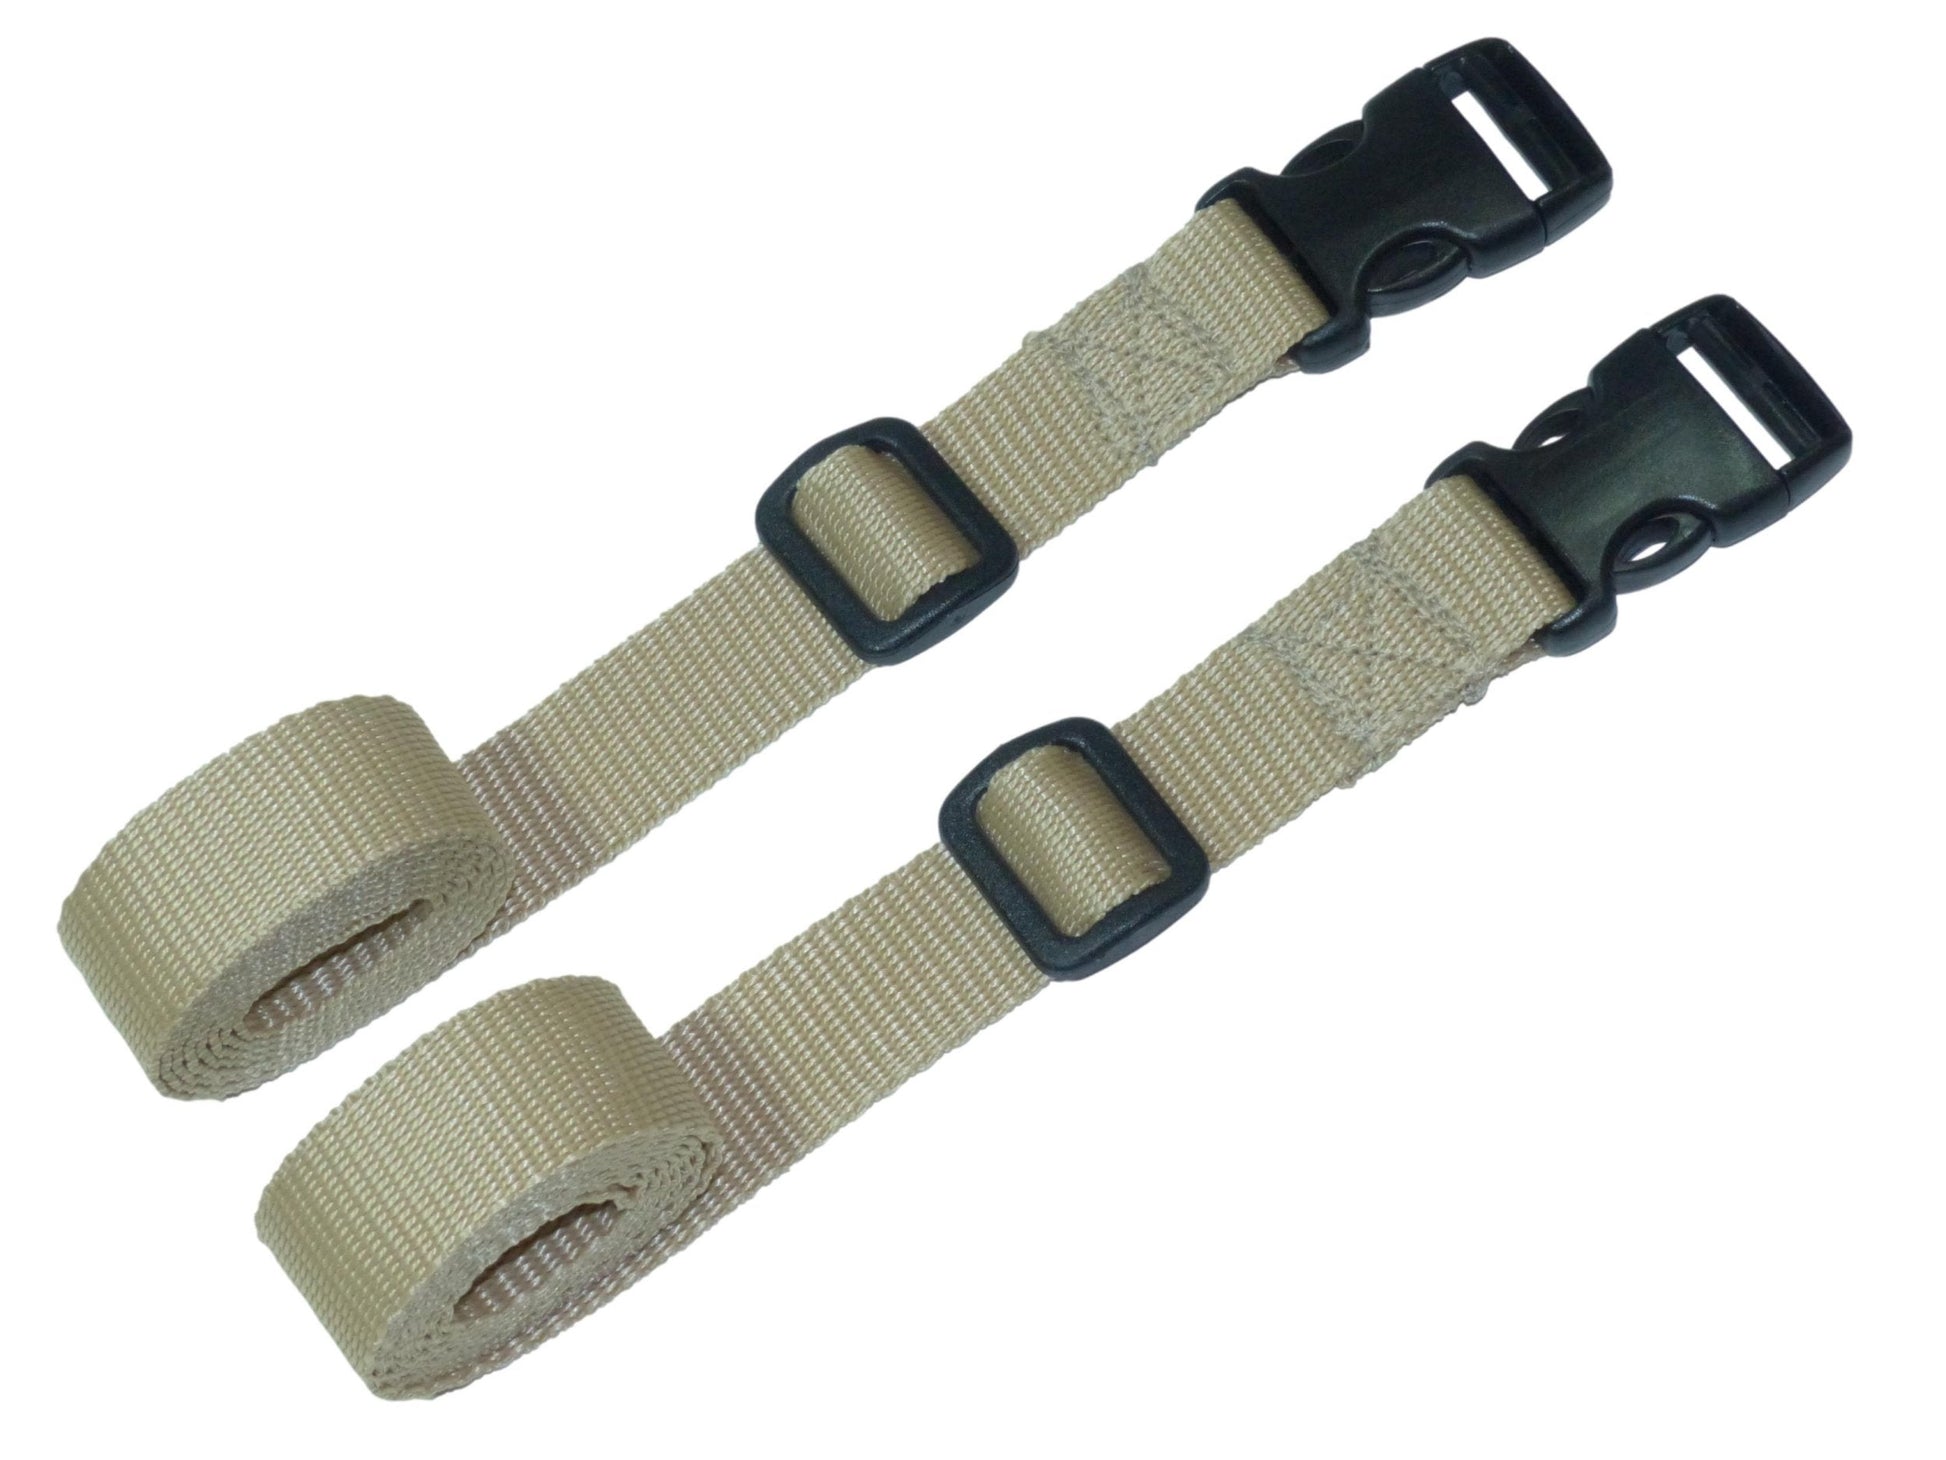 Benristraps 2 Pack Webbing Straps with Clips - Adjustable Luggage Straps in white